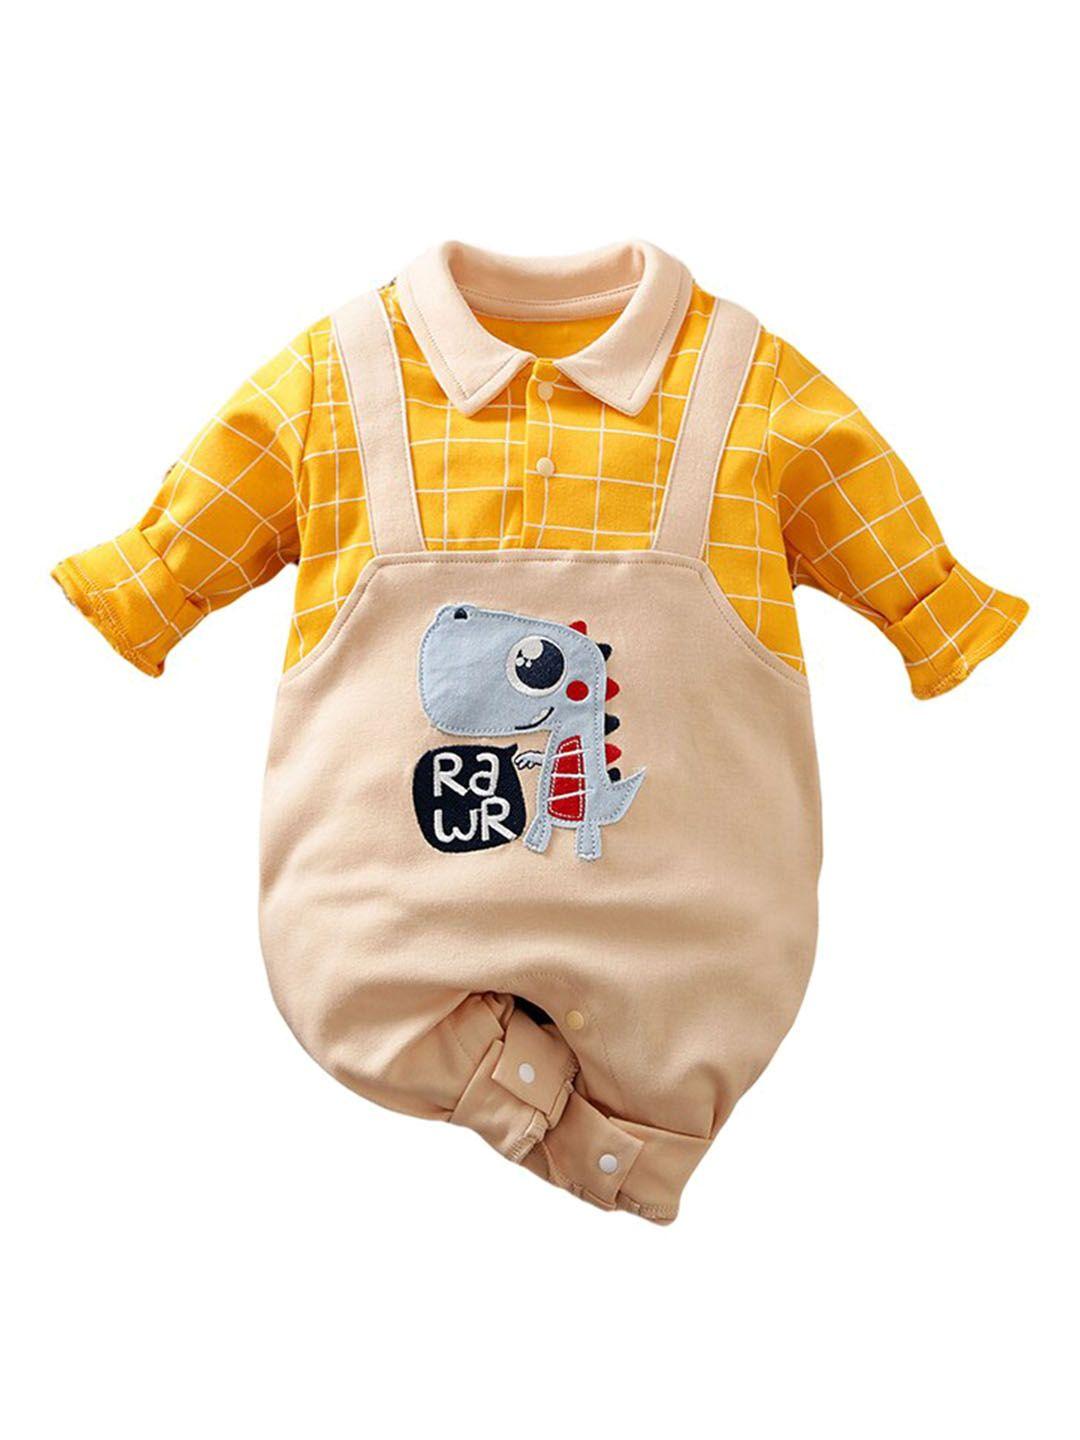 stylecast-infants-kids-yellow-&-beige-checked-cotton-rompers